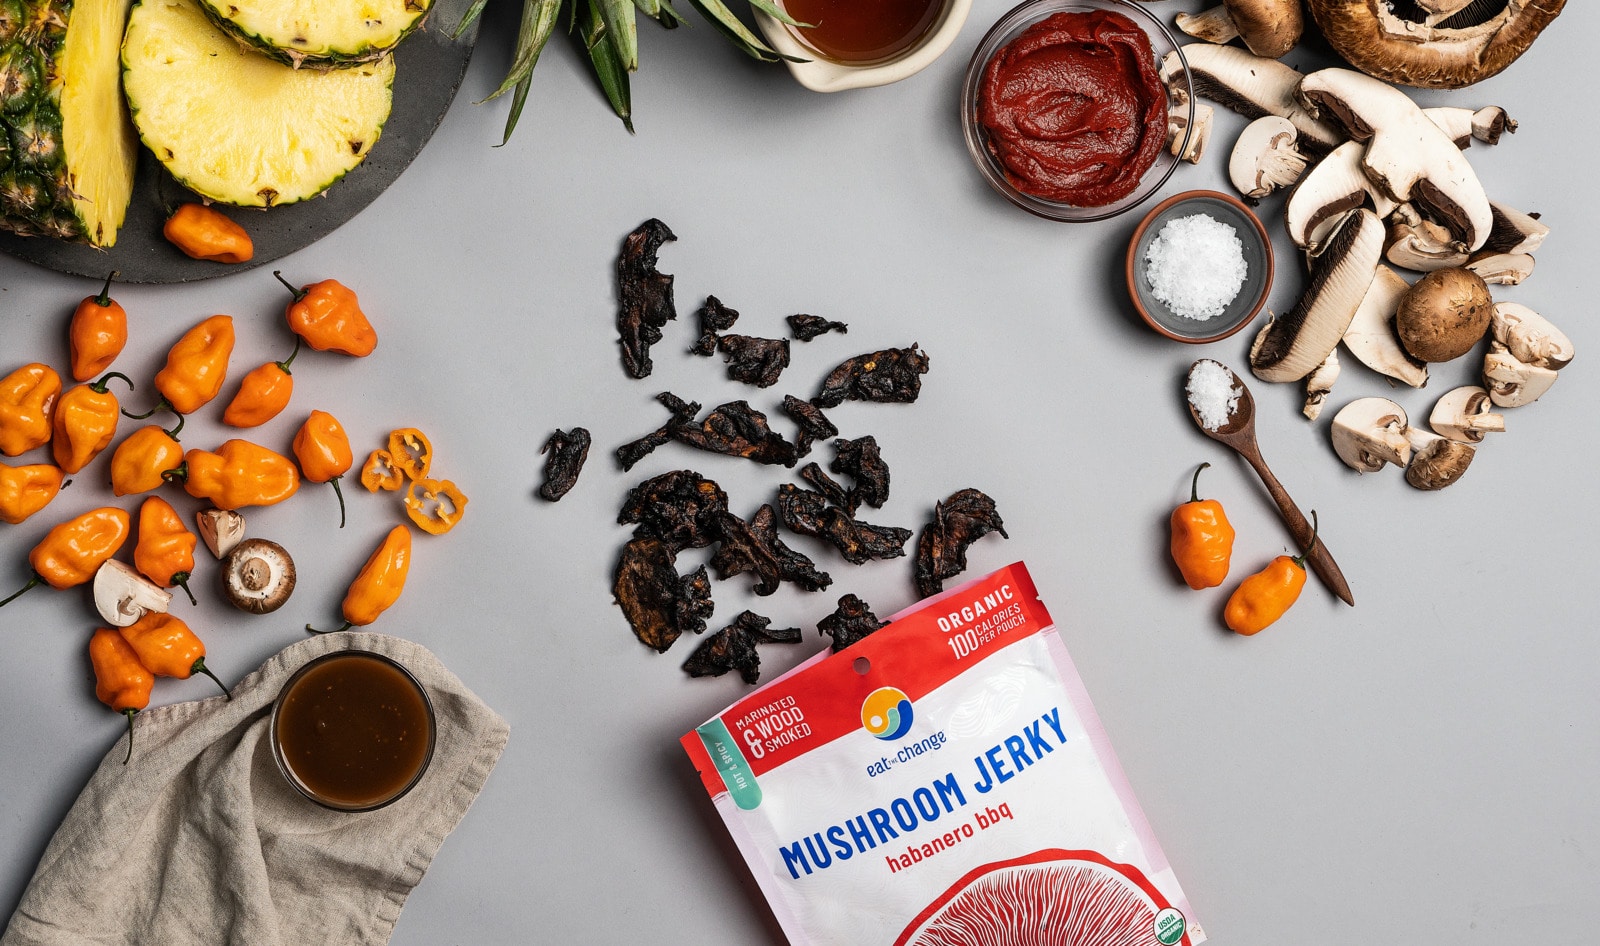 Beyond Meat Exec and Top Chef Alum Partner to Create Vegan Jerky to Help the Planet